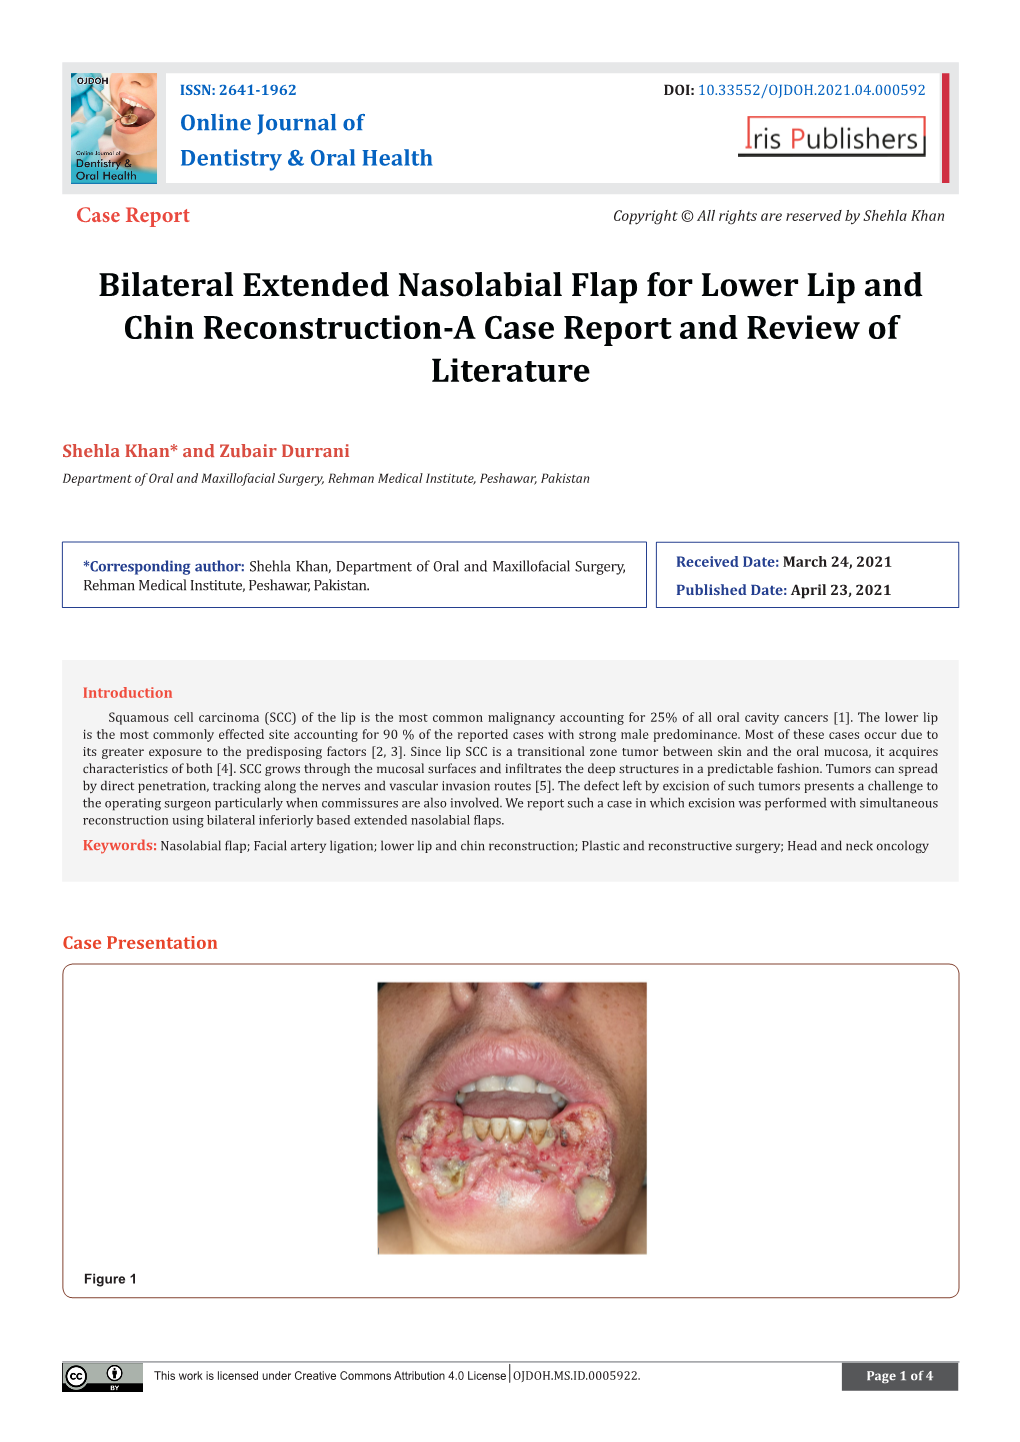 Bilateral Extended Nasolabial Flap for Lower Lip and Chin Reconstruction-A Case Report and Review of Literature